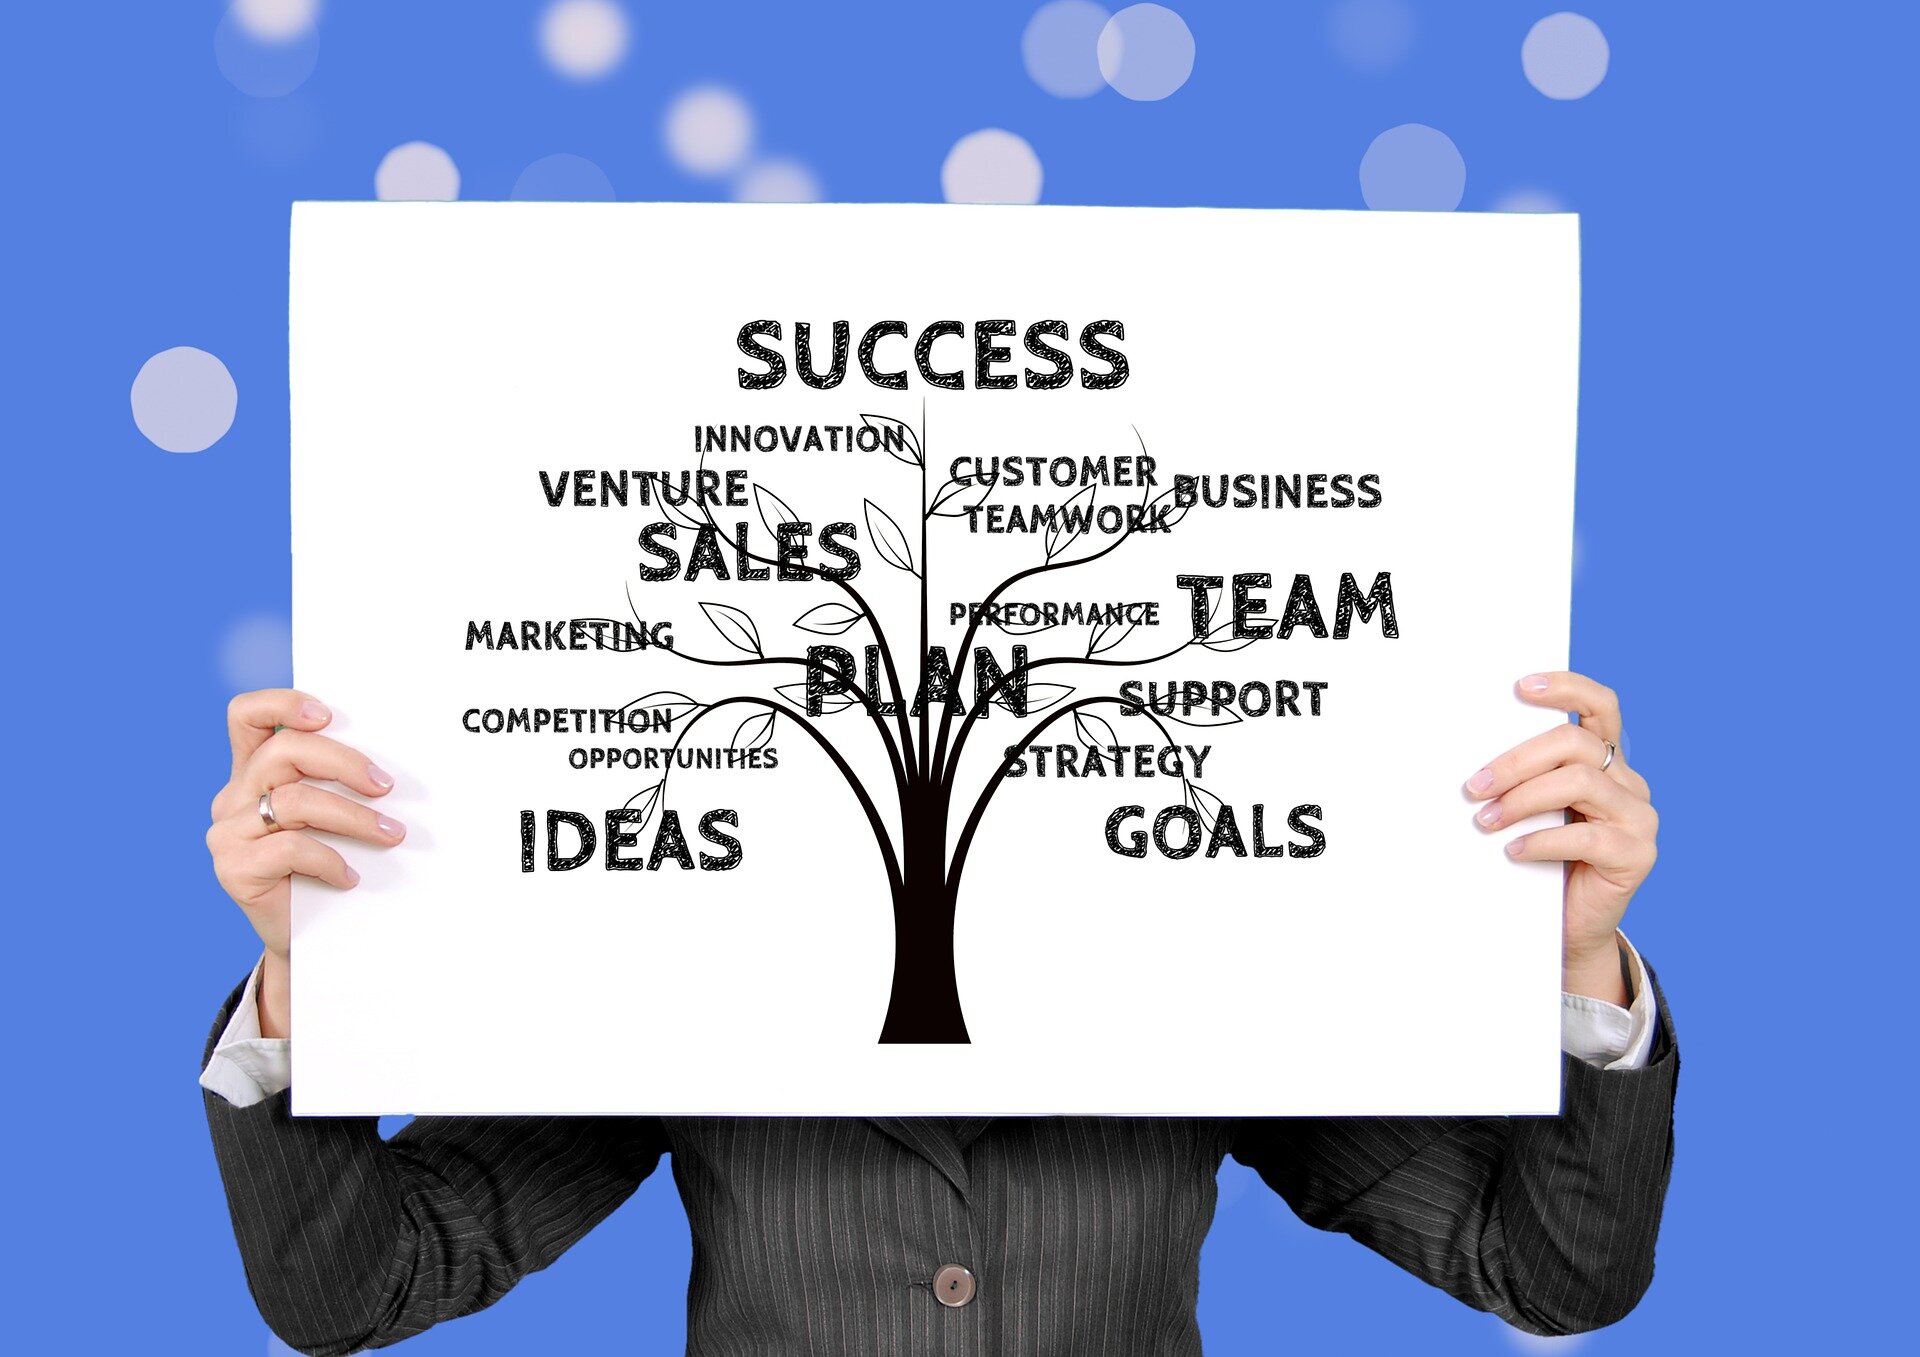 7 Essential Elements of a Business Plan